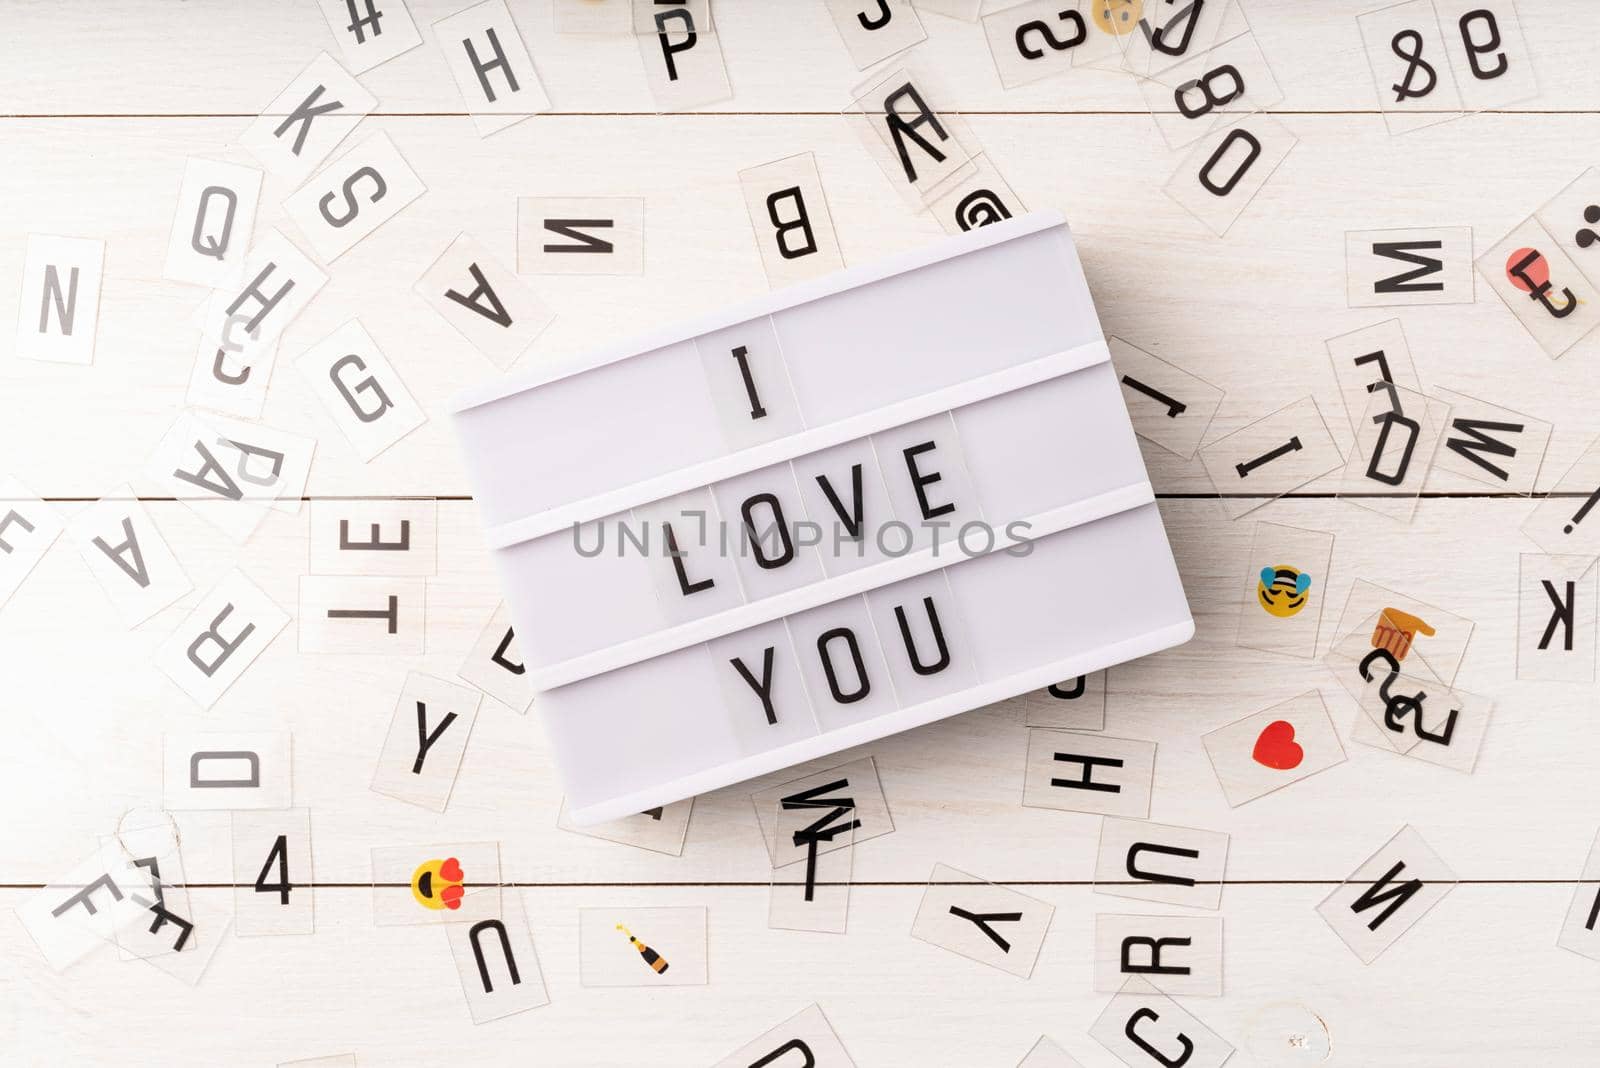 Valentines Day. i love you words on a lightbox top view with scattered plastic letter on white background